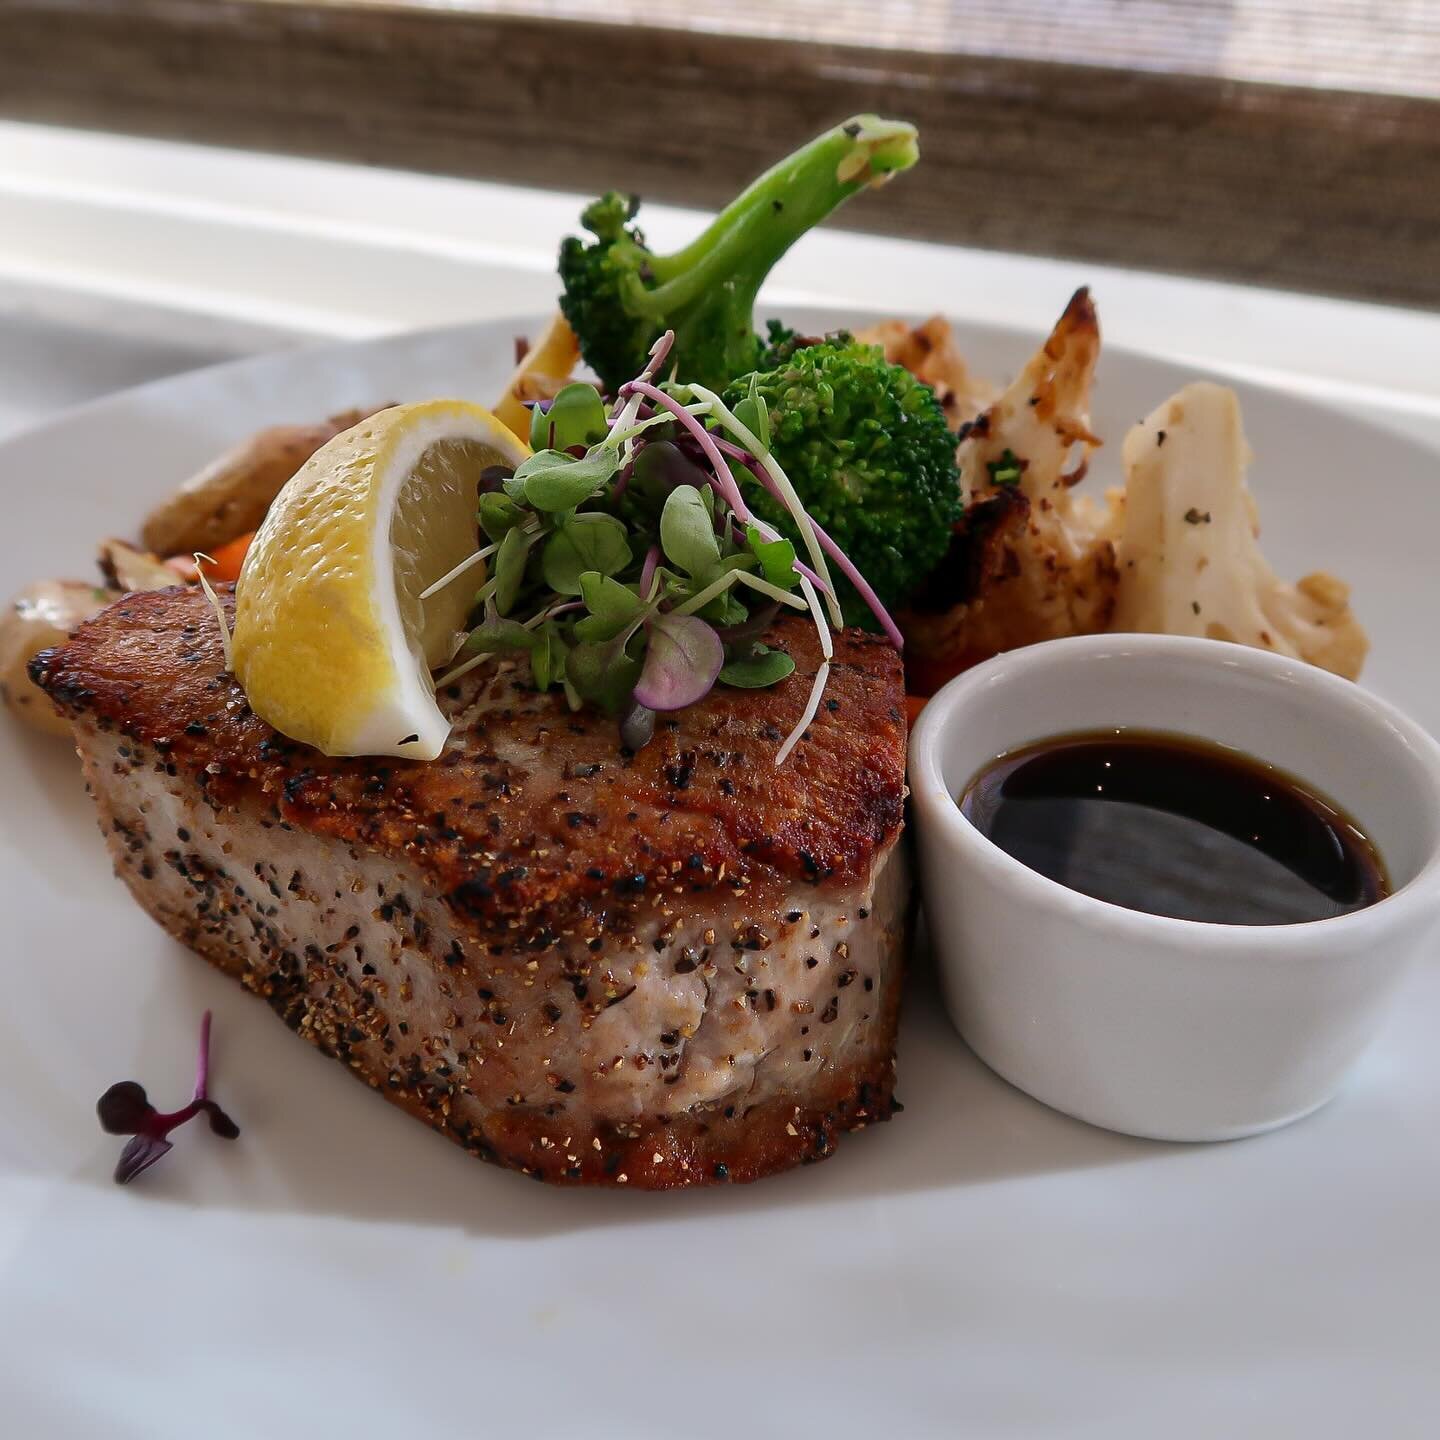 Seared Yellowfin Tuna
Served with oven roasted potatoes, broccoli, carrots, cauliflower &amp; soy ginger jus or beurre blanc

1020 Post Road Darien, CT 06820
203 655 1020

#connecticuteats #203local #connecticutfoodie #cteats #foodie #tuna #searedtun